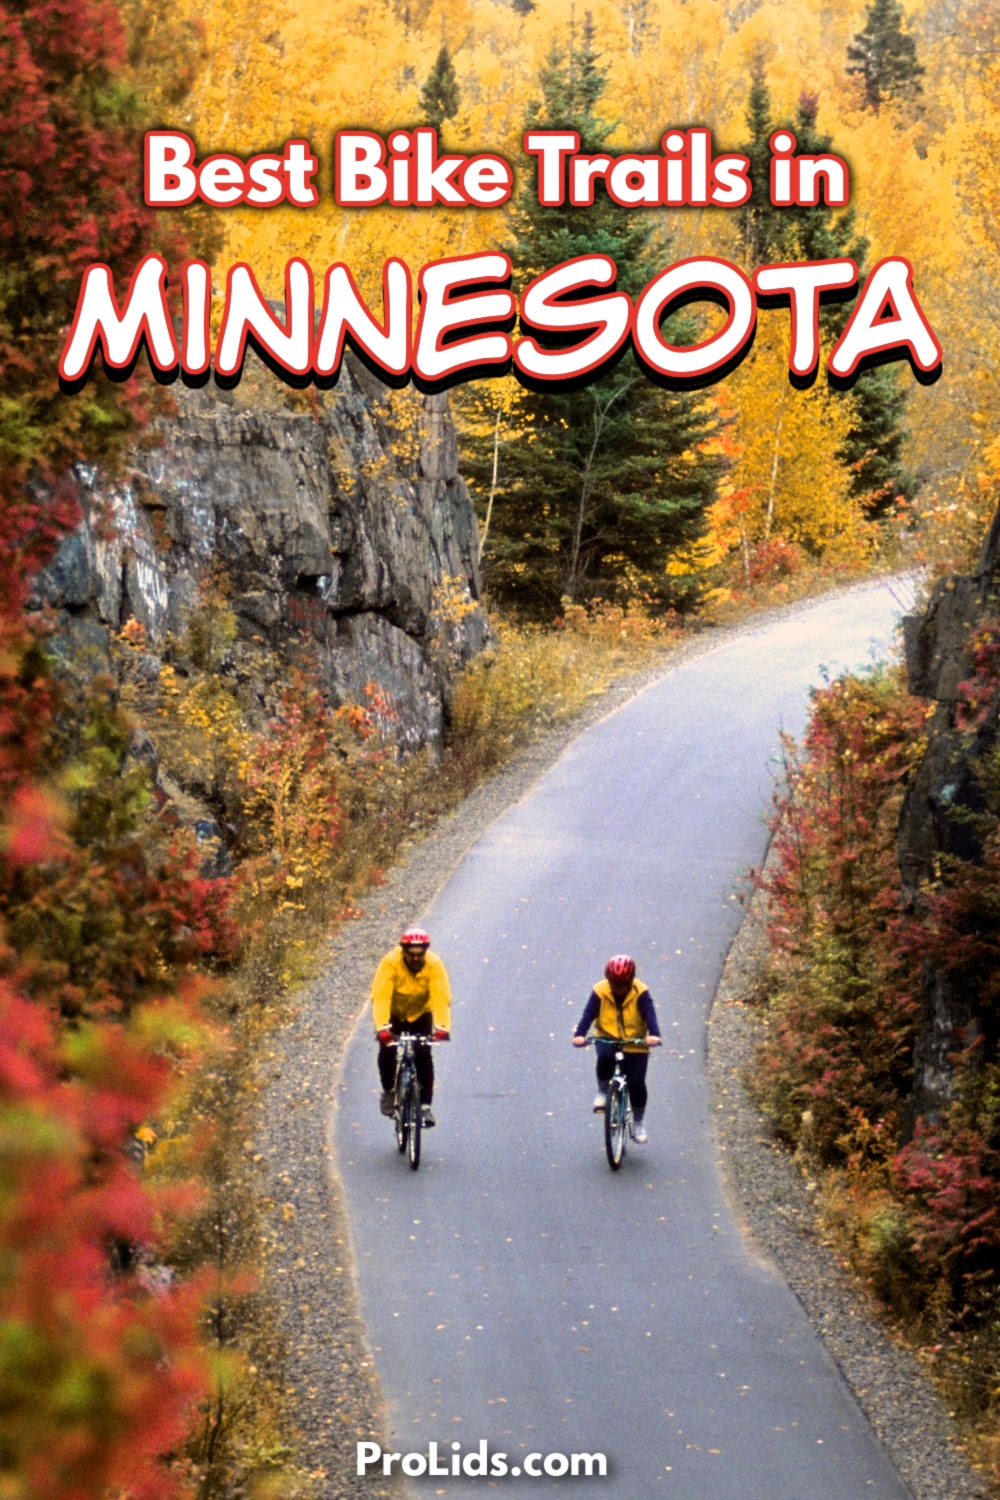 Discovering the premier bike trails in Minnesota is an invitation to experience the state's beauty in a unique way, one trail at a time.